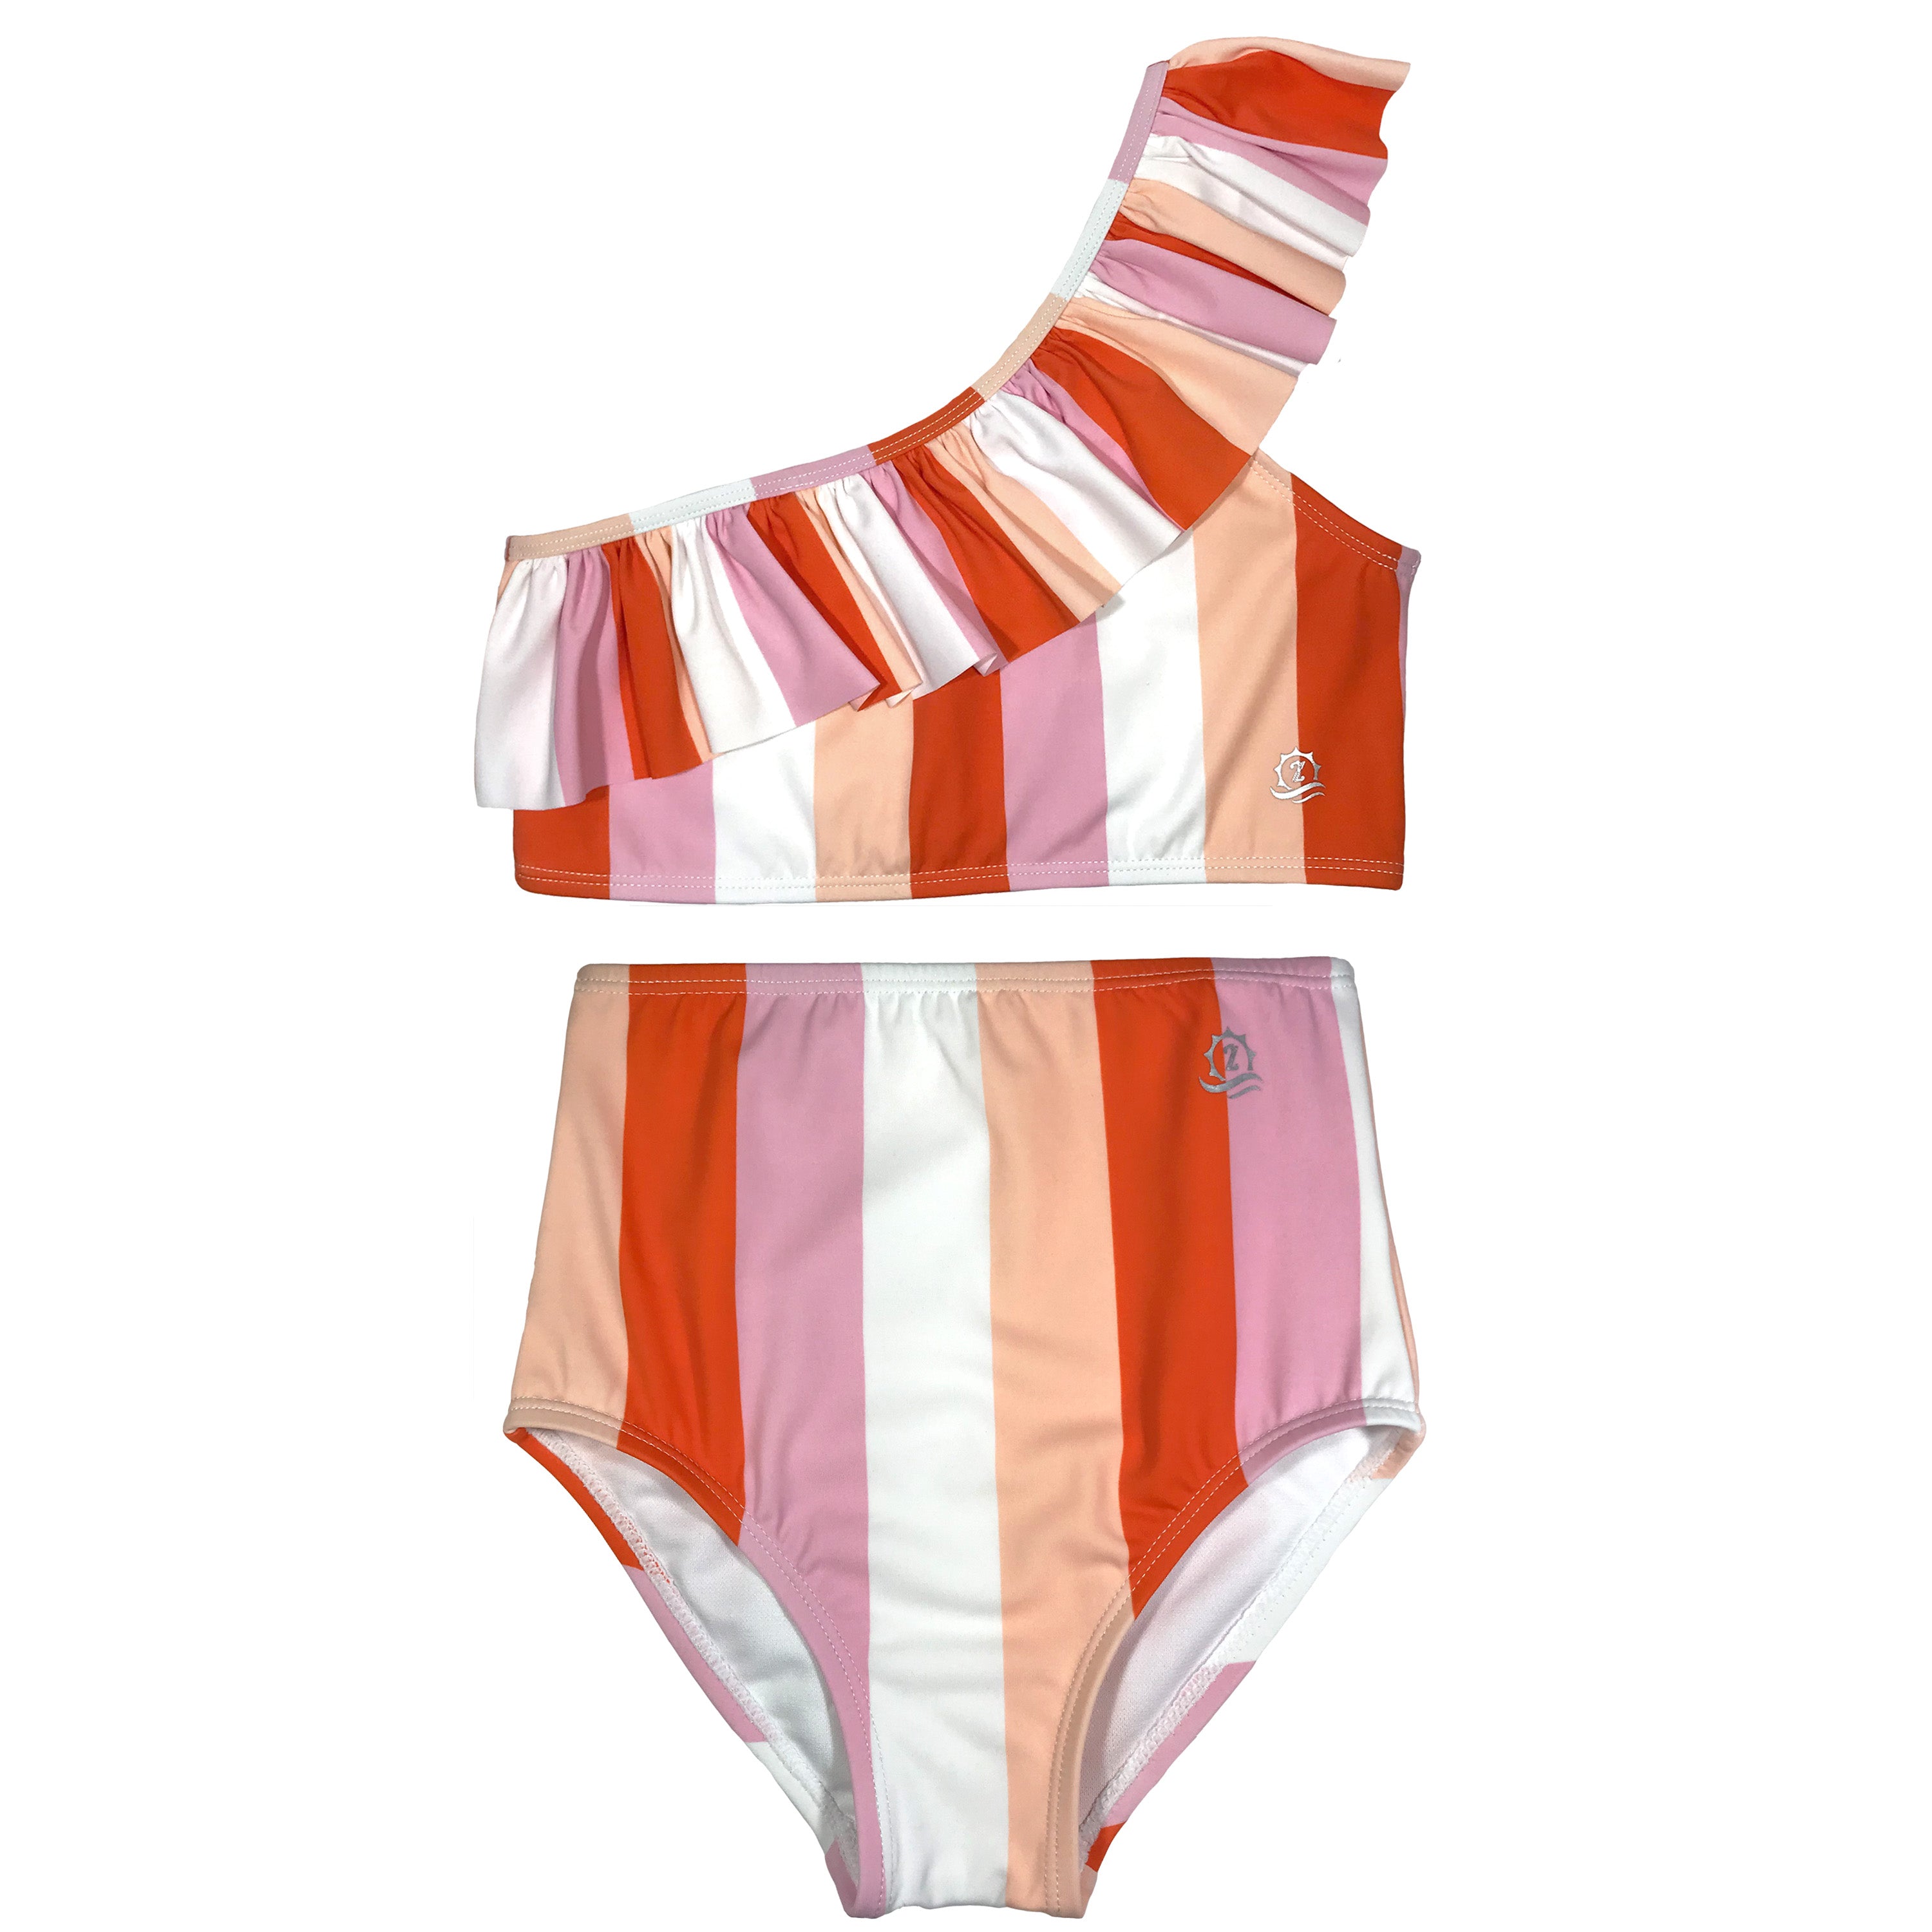 Buy Be Perfect Kids Panties for Girls Multicolor - 12 Piece Online